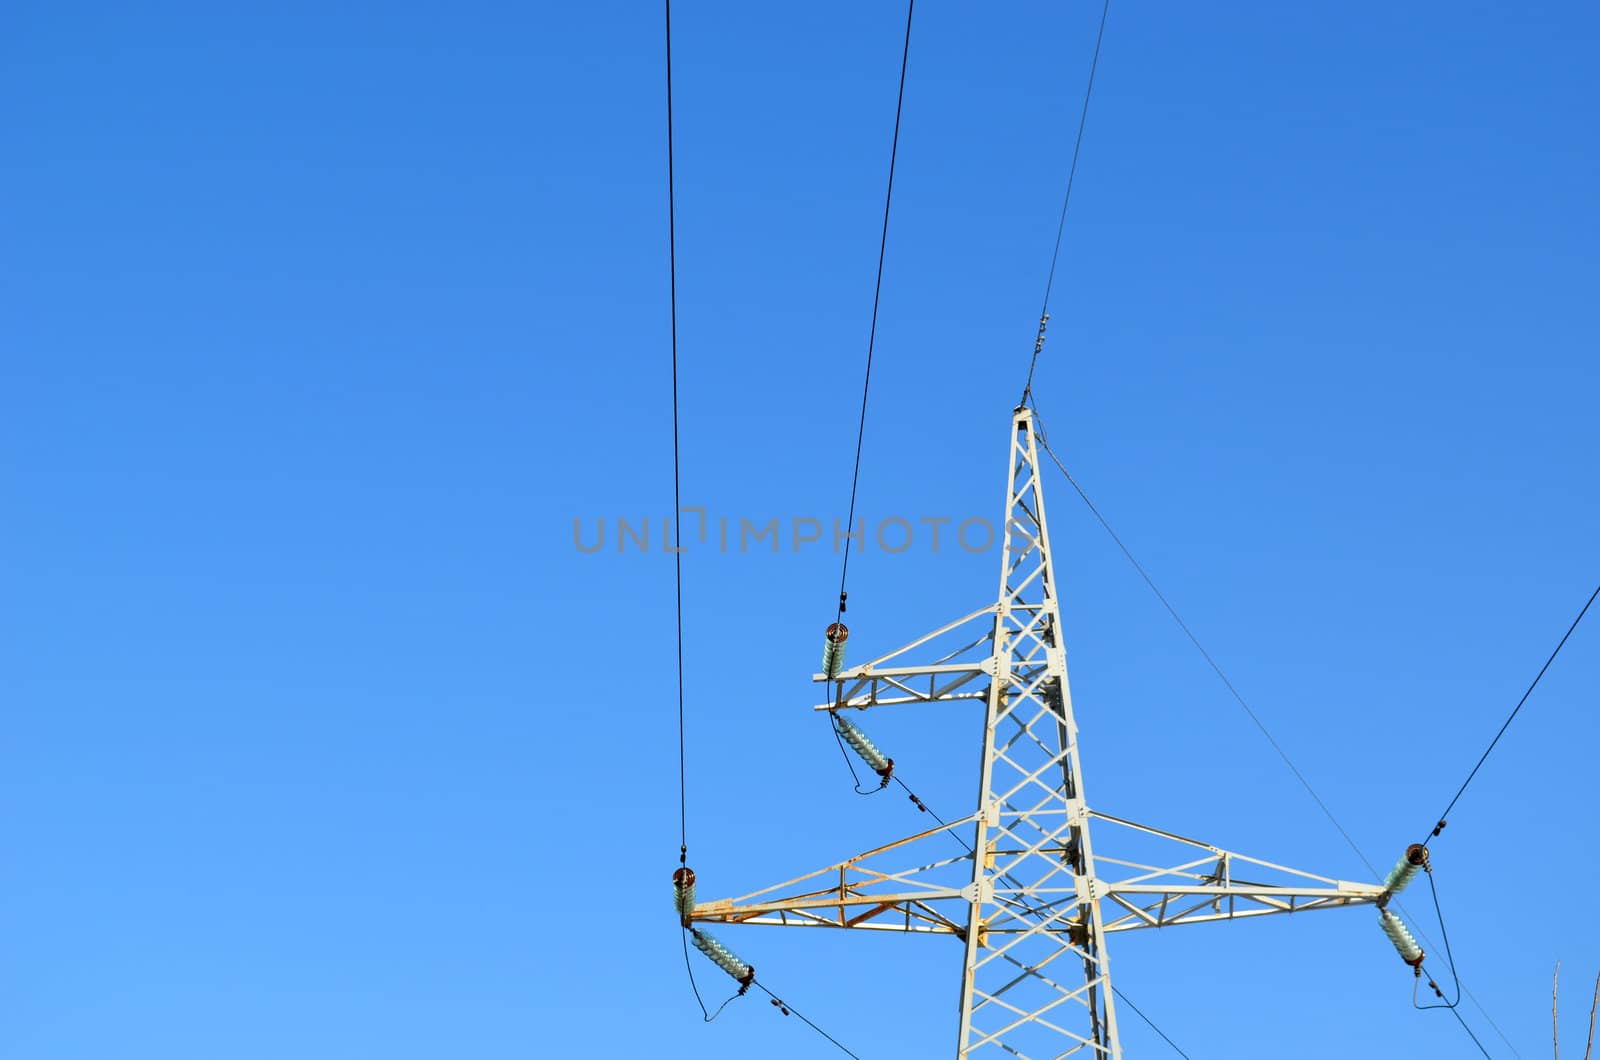 High-voltage electricity wires and poles in background of bluse sky with clouds.